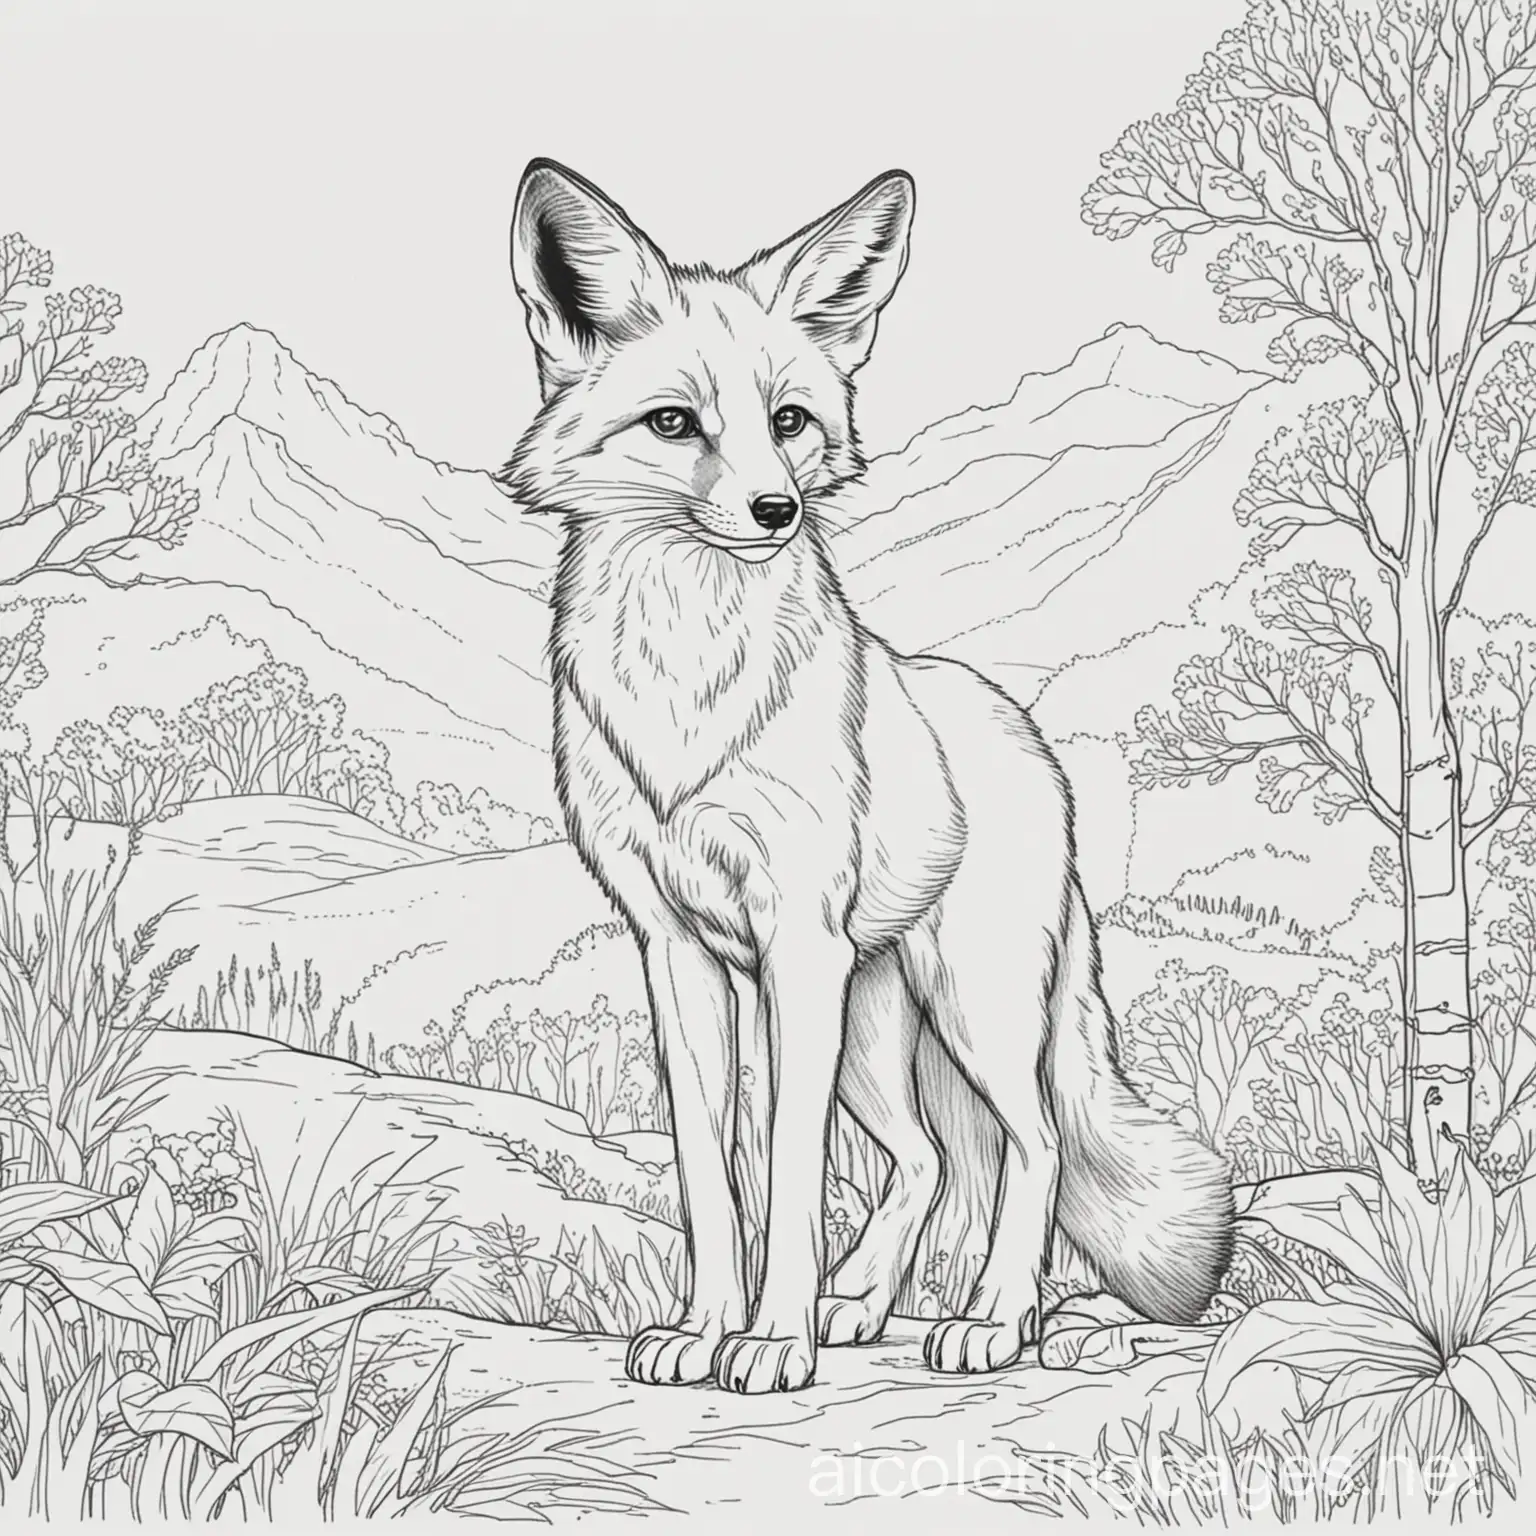 fox  picture in savana  playing
 for coloring book children 5 and above, Coloring Page, black and white, line art, white background, Simplicity, Ample White Space. The background of the coloring page is plain white to make it easy for young children to color within the lines. The outlines of all the subjects are easy to distinguish, making it simple for kids to color without too much difficulty